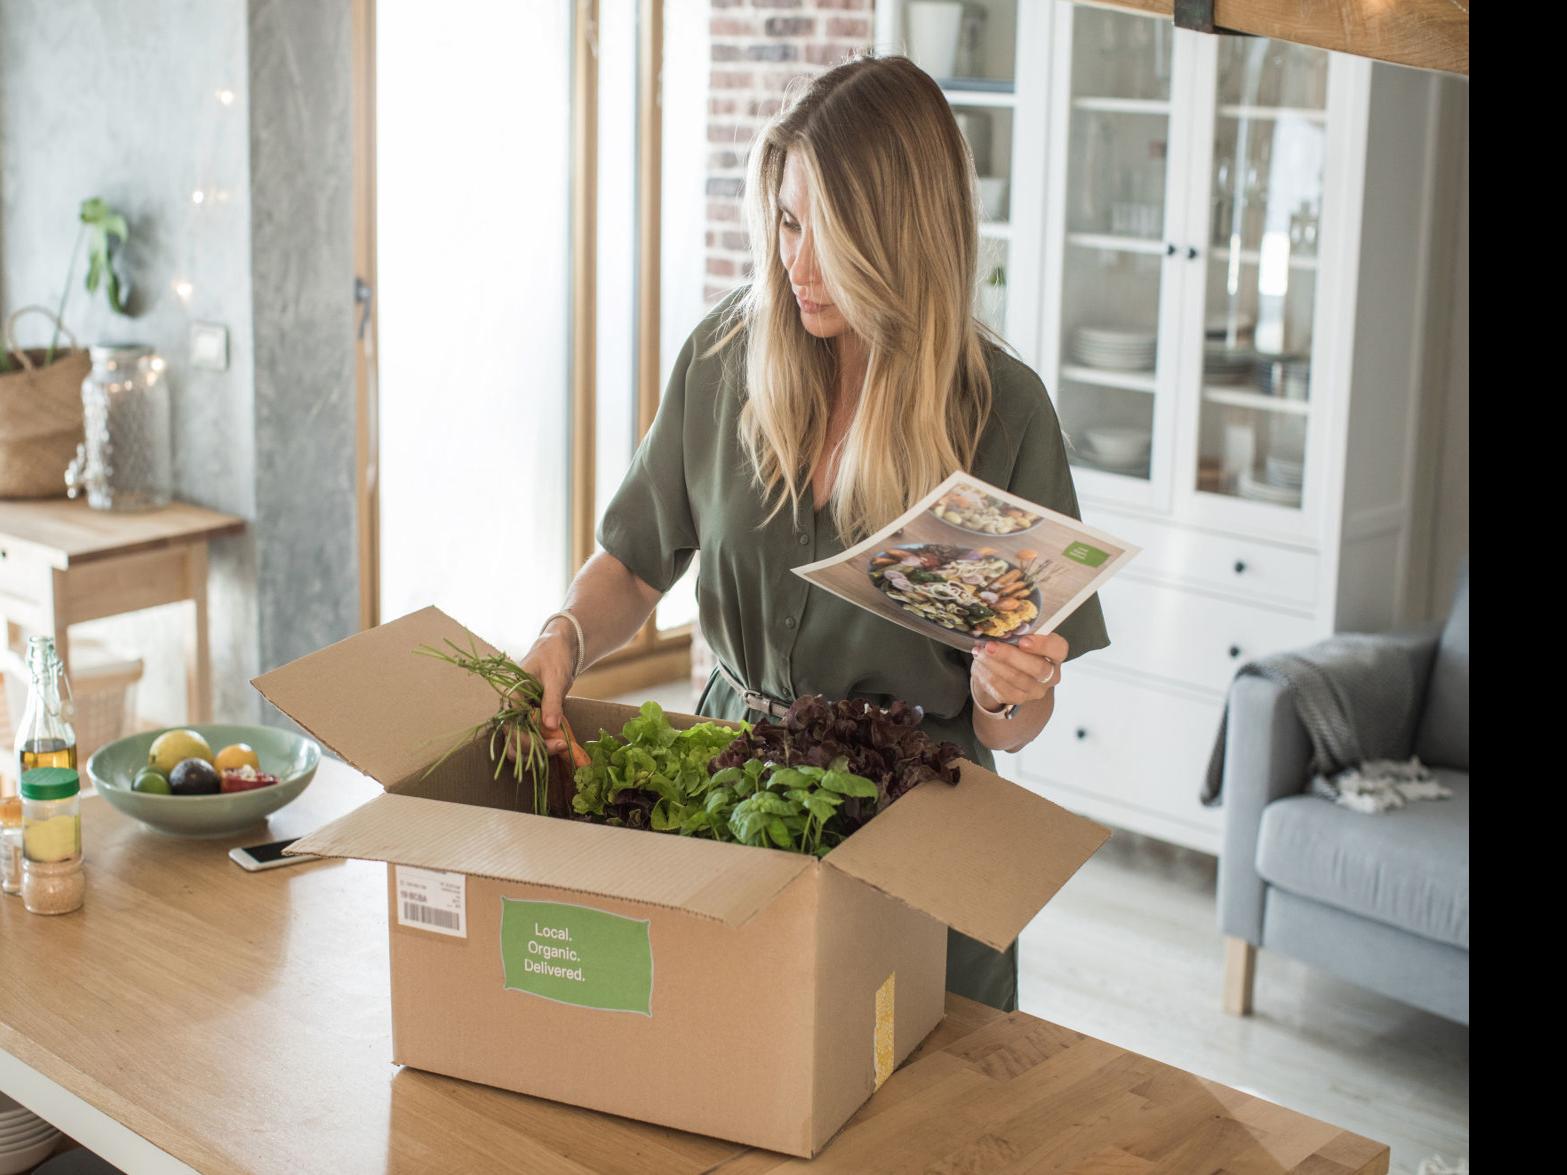 Get Healthy Food Delivered to Your Home in St. Louis with SareFood